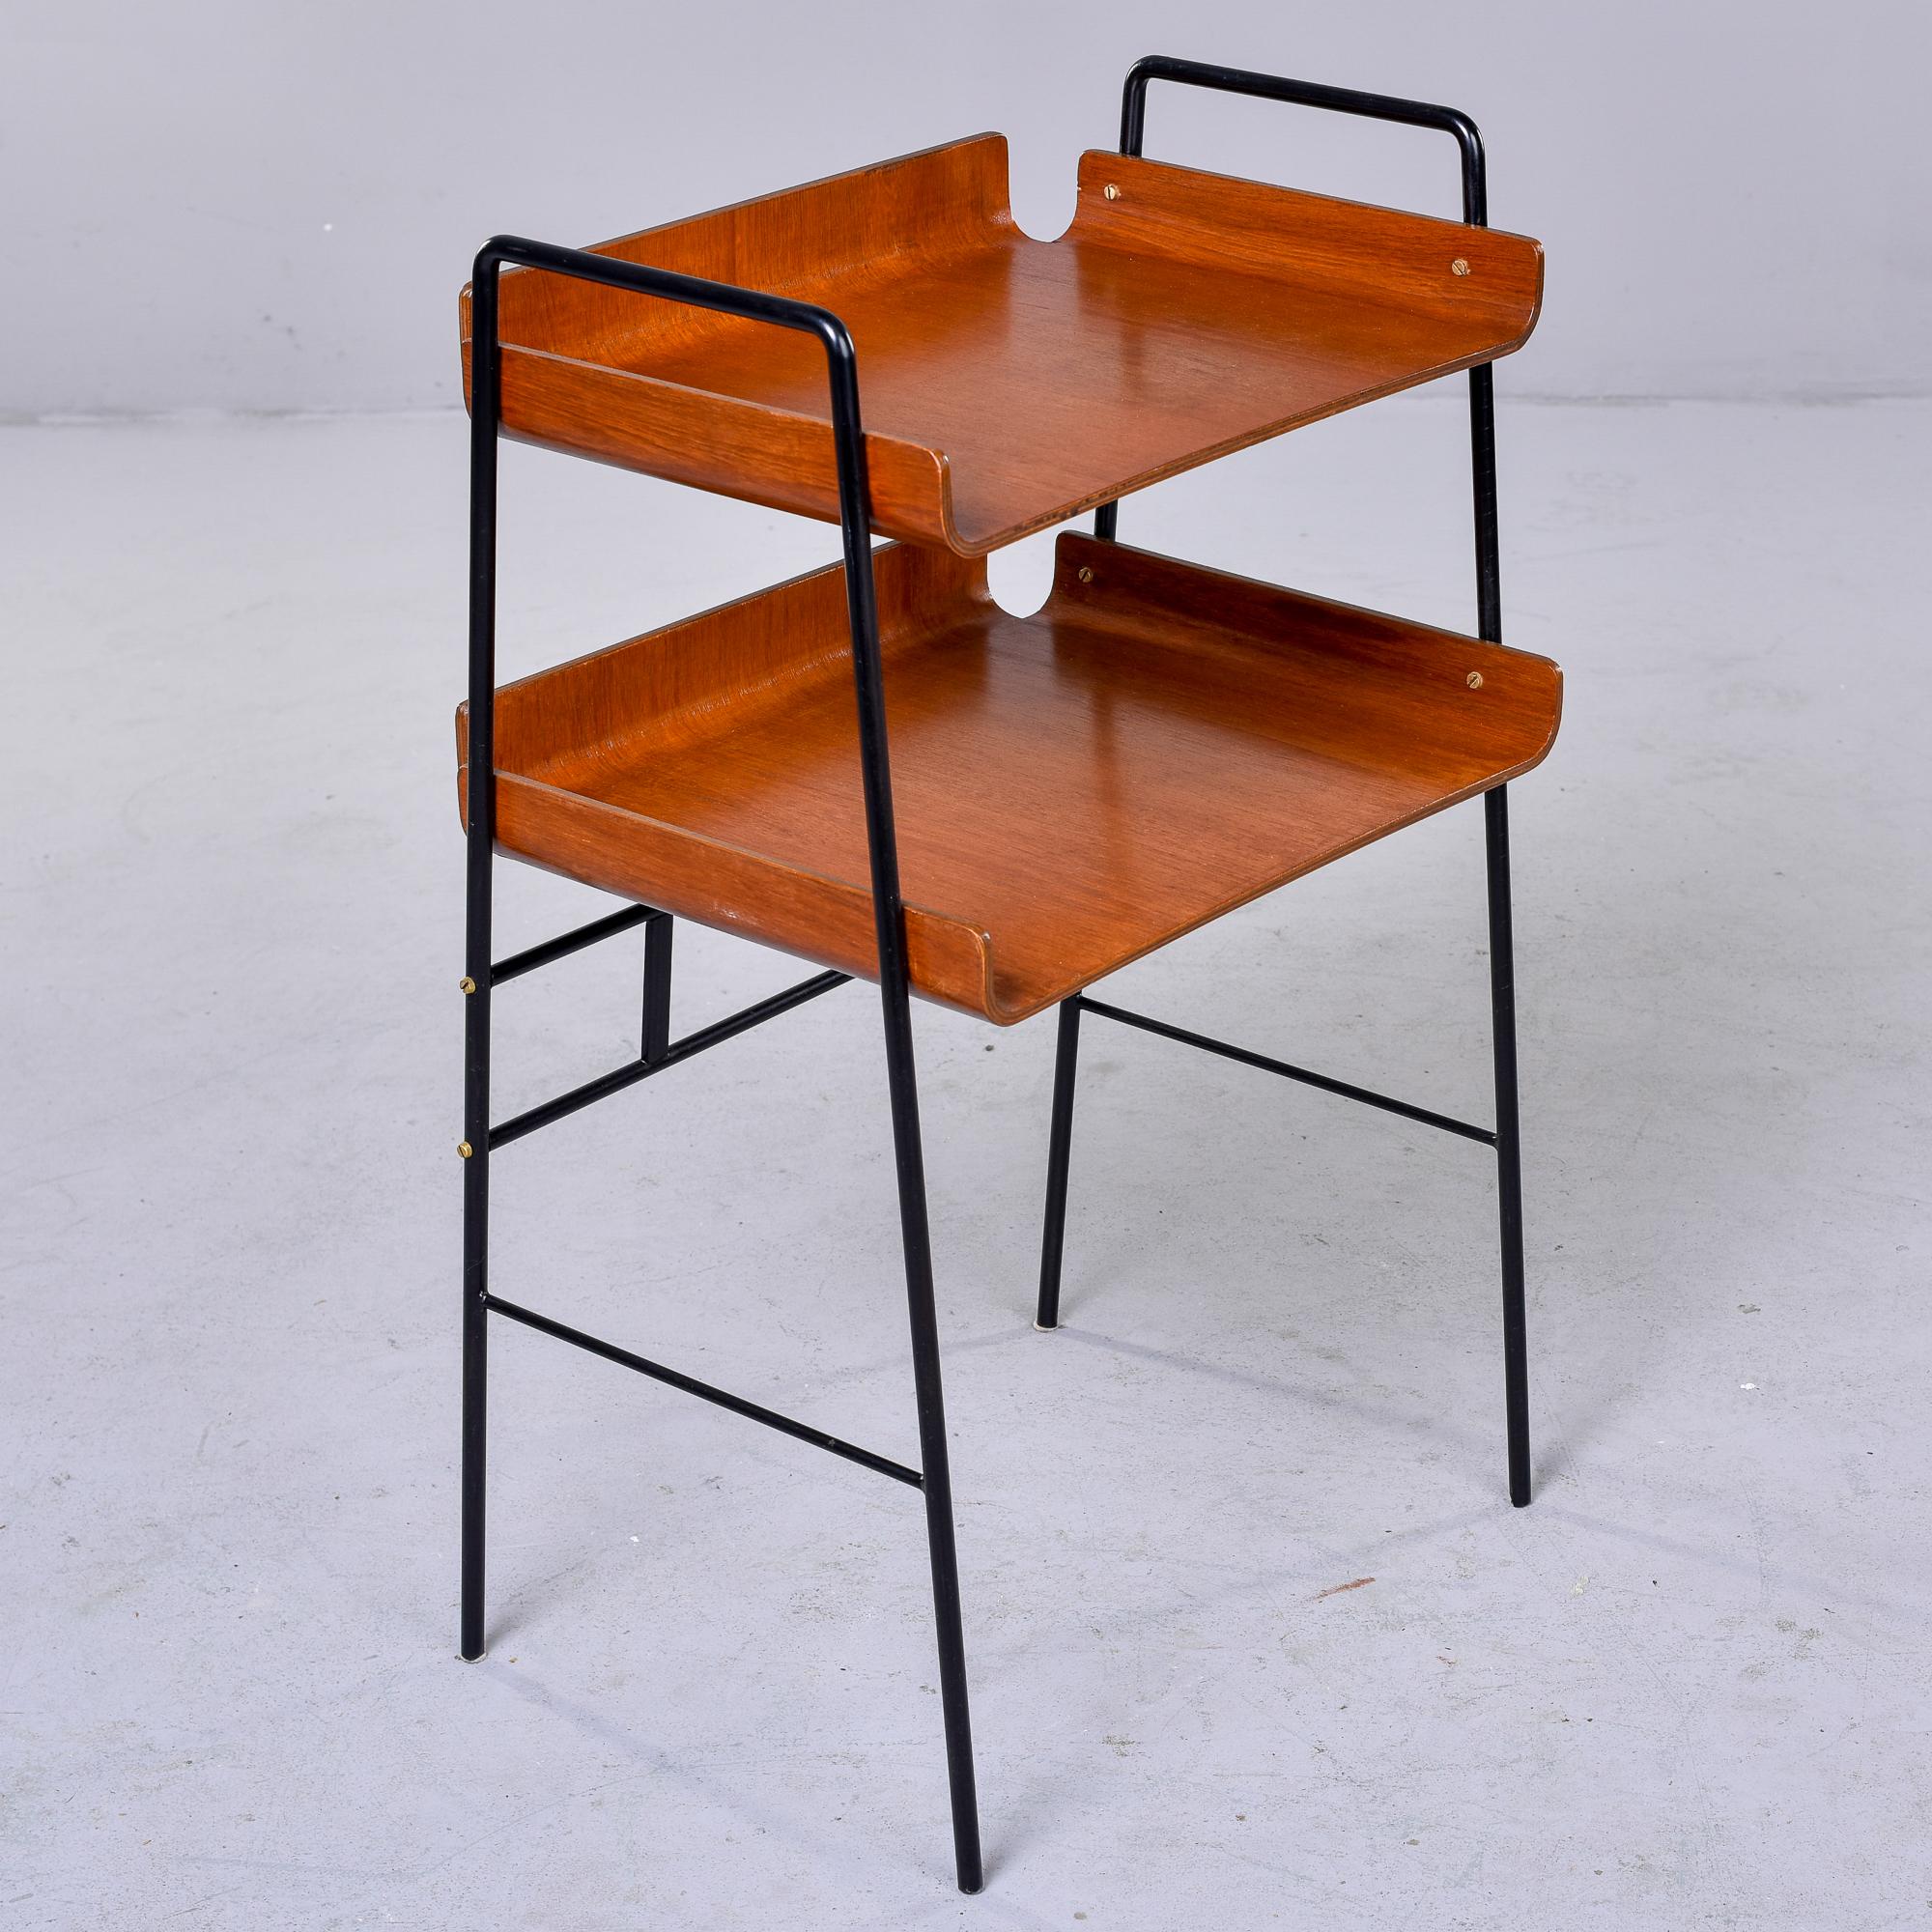 Italian Mid-Century Two Tier Bentwood Table with Slender Black Iron Frame For Sale 6